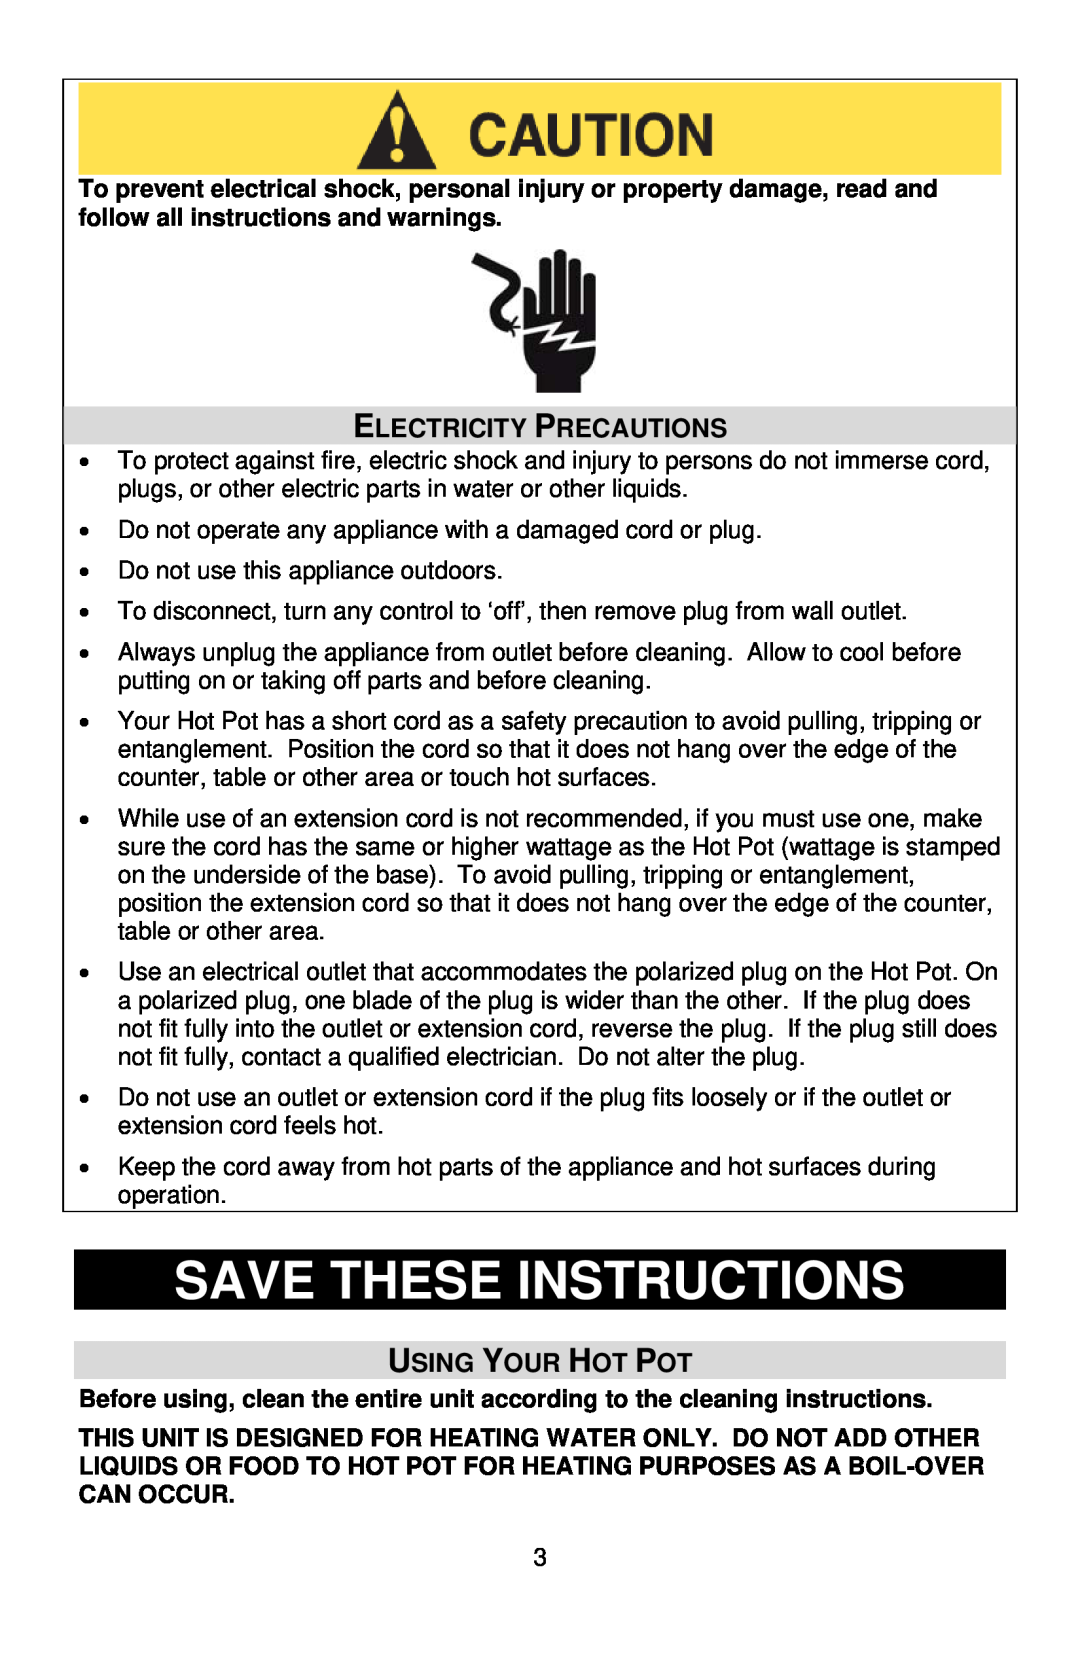 West Bend Electric Hot Pot instruction manual Save These Instructions, Electricity Precautions, Using Your Hot Pot 